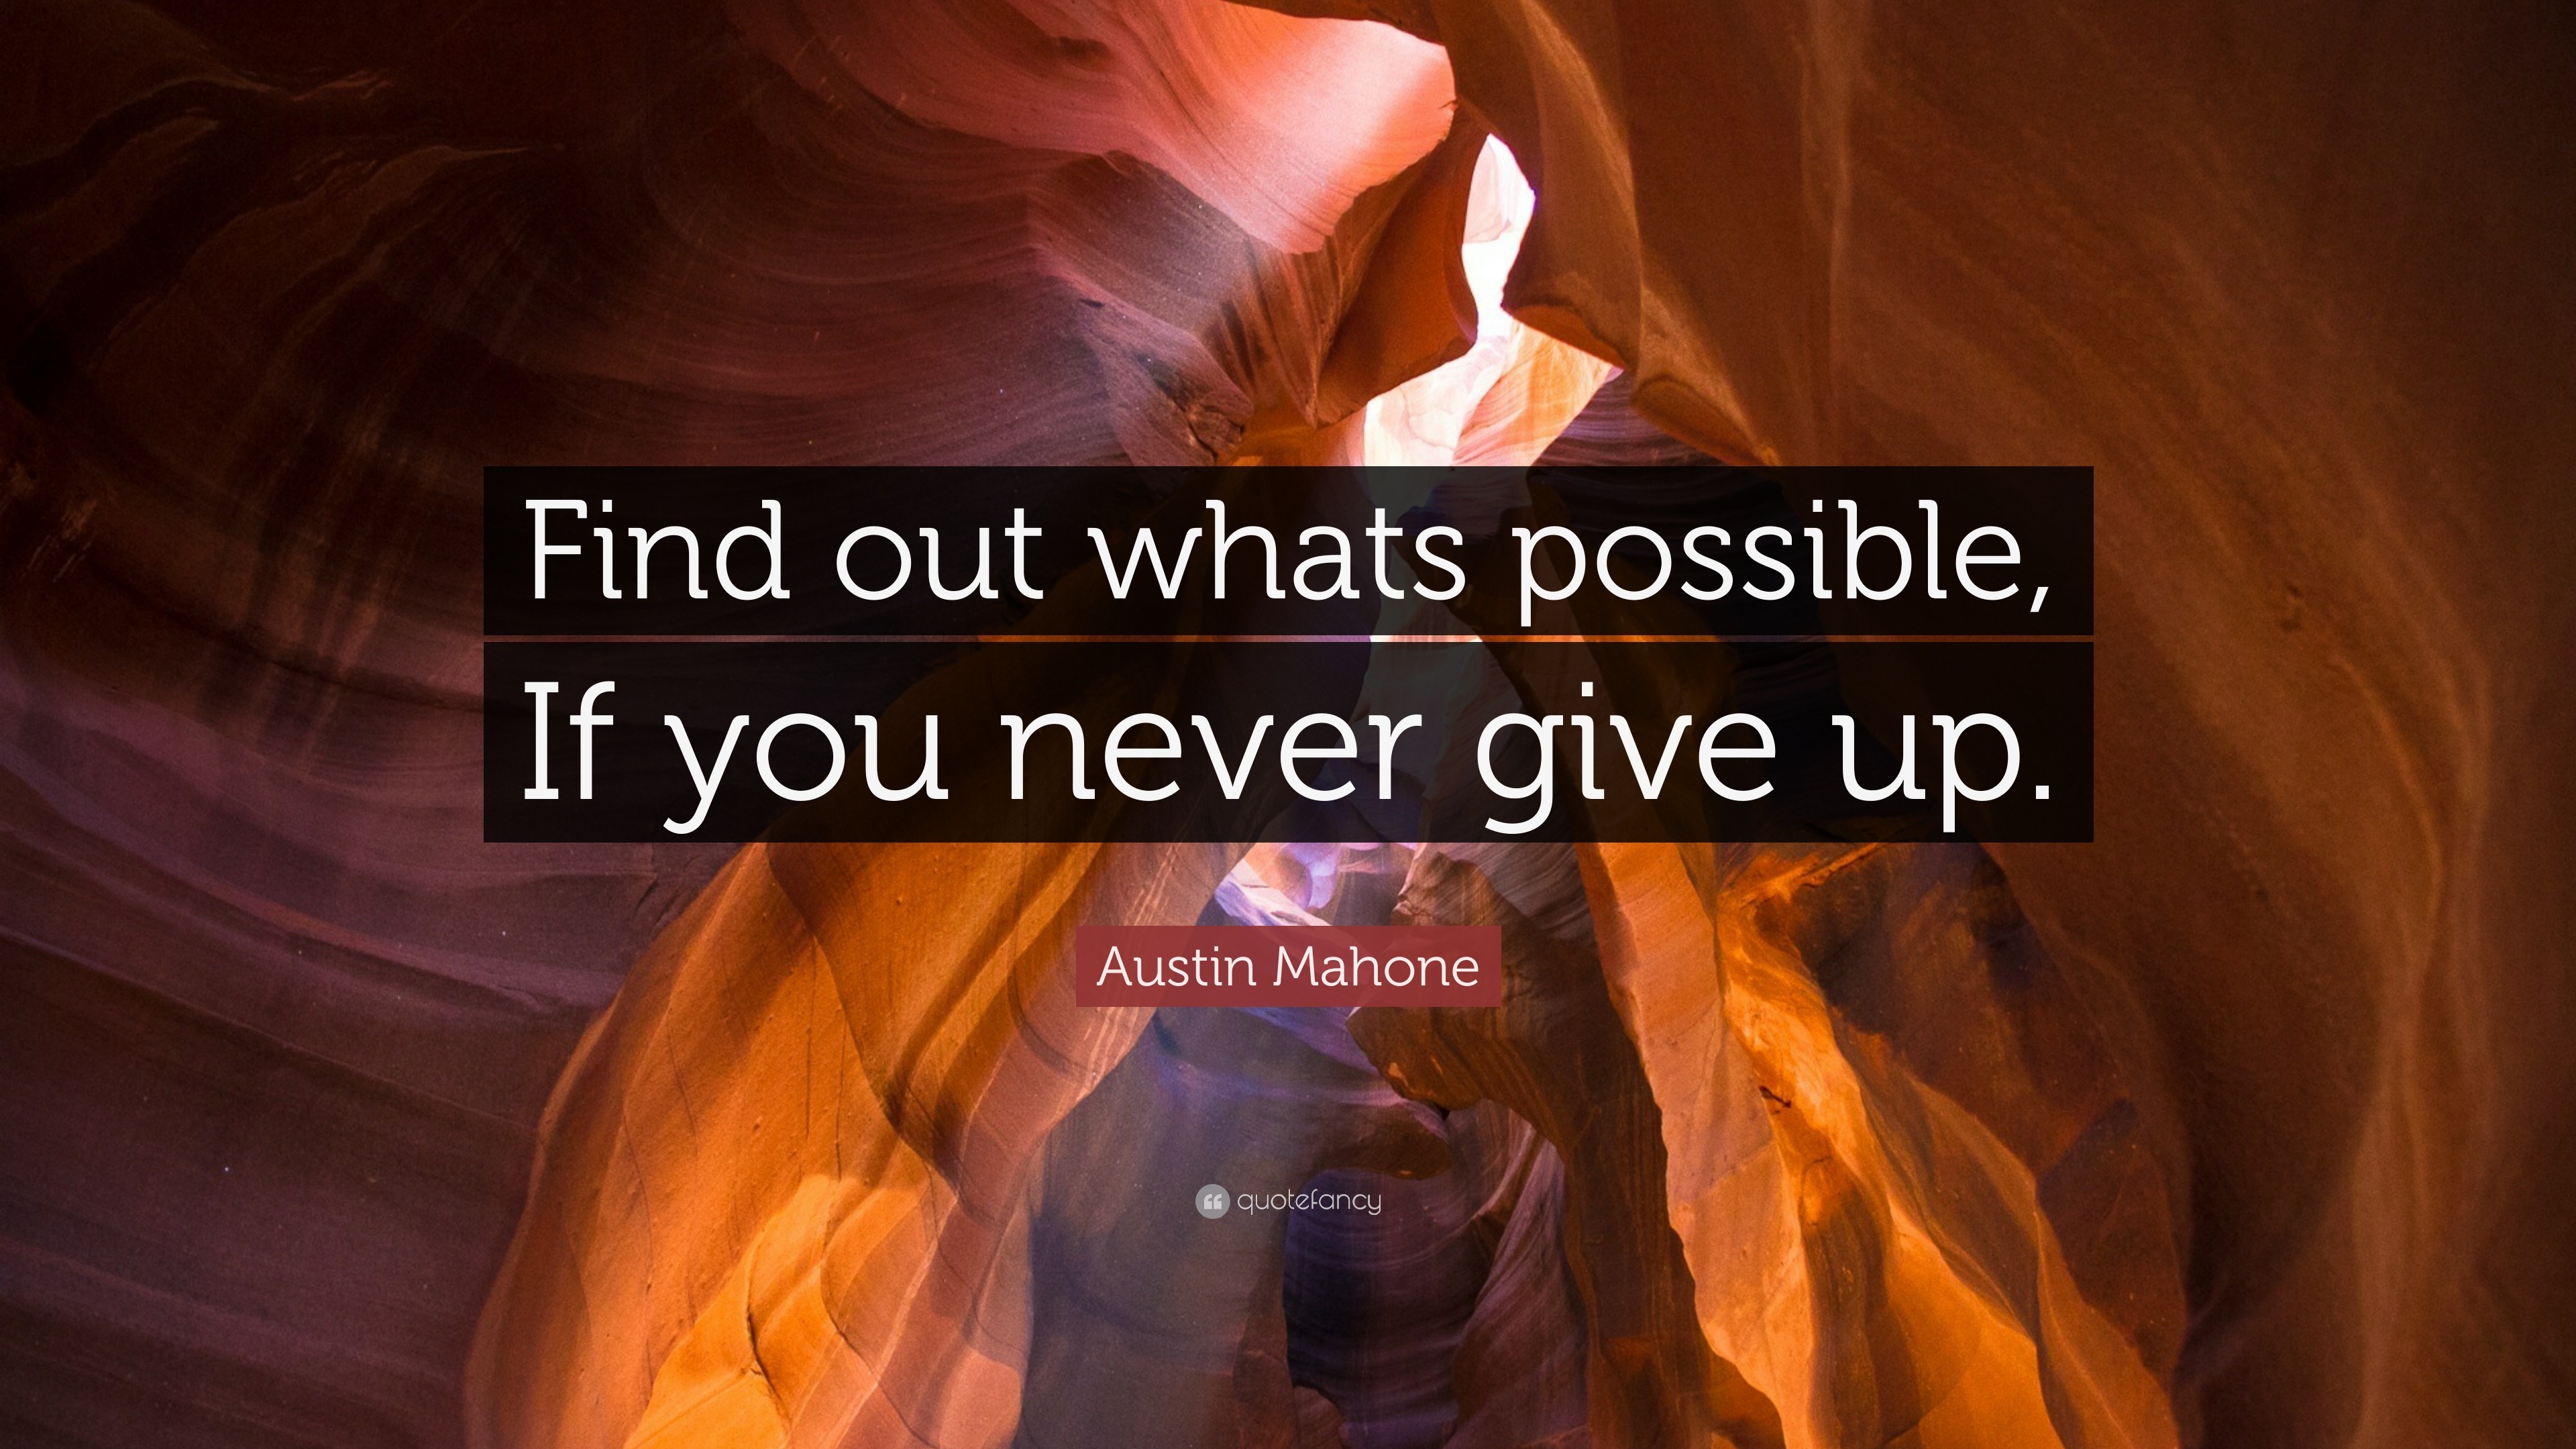 Austin Mahone Quote: “Find out whats possible, If you never give up.”